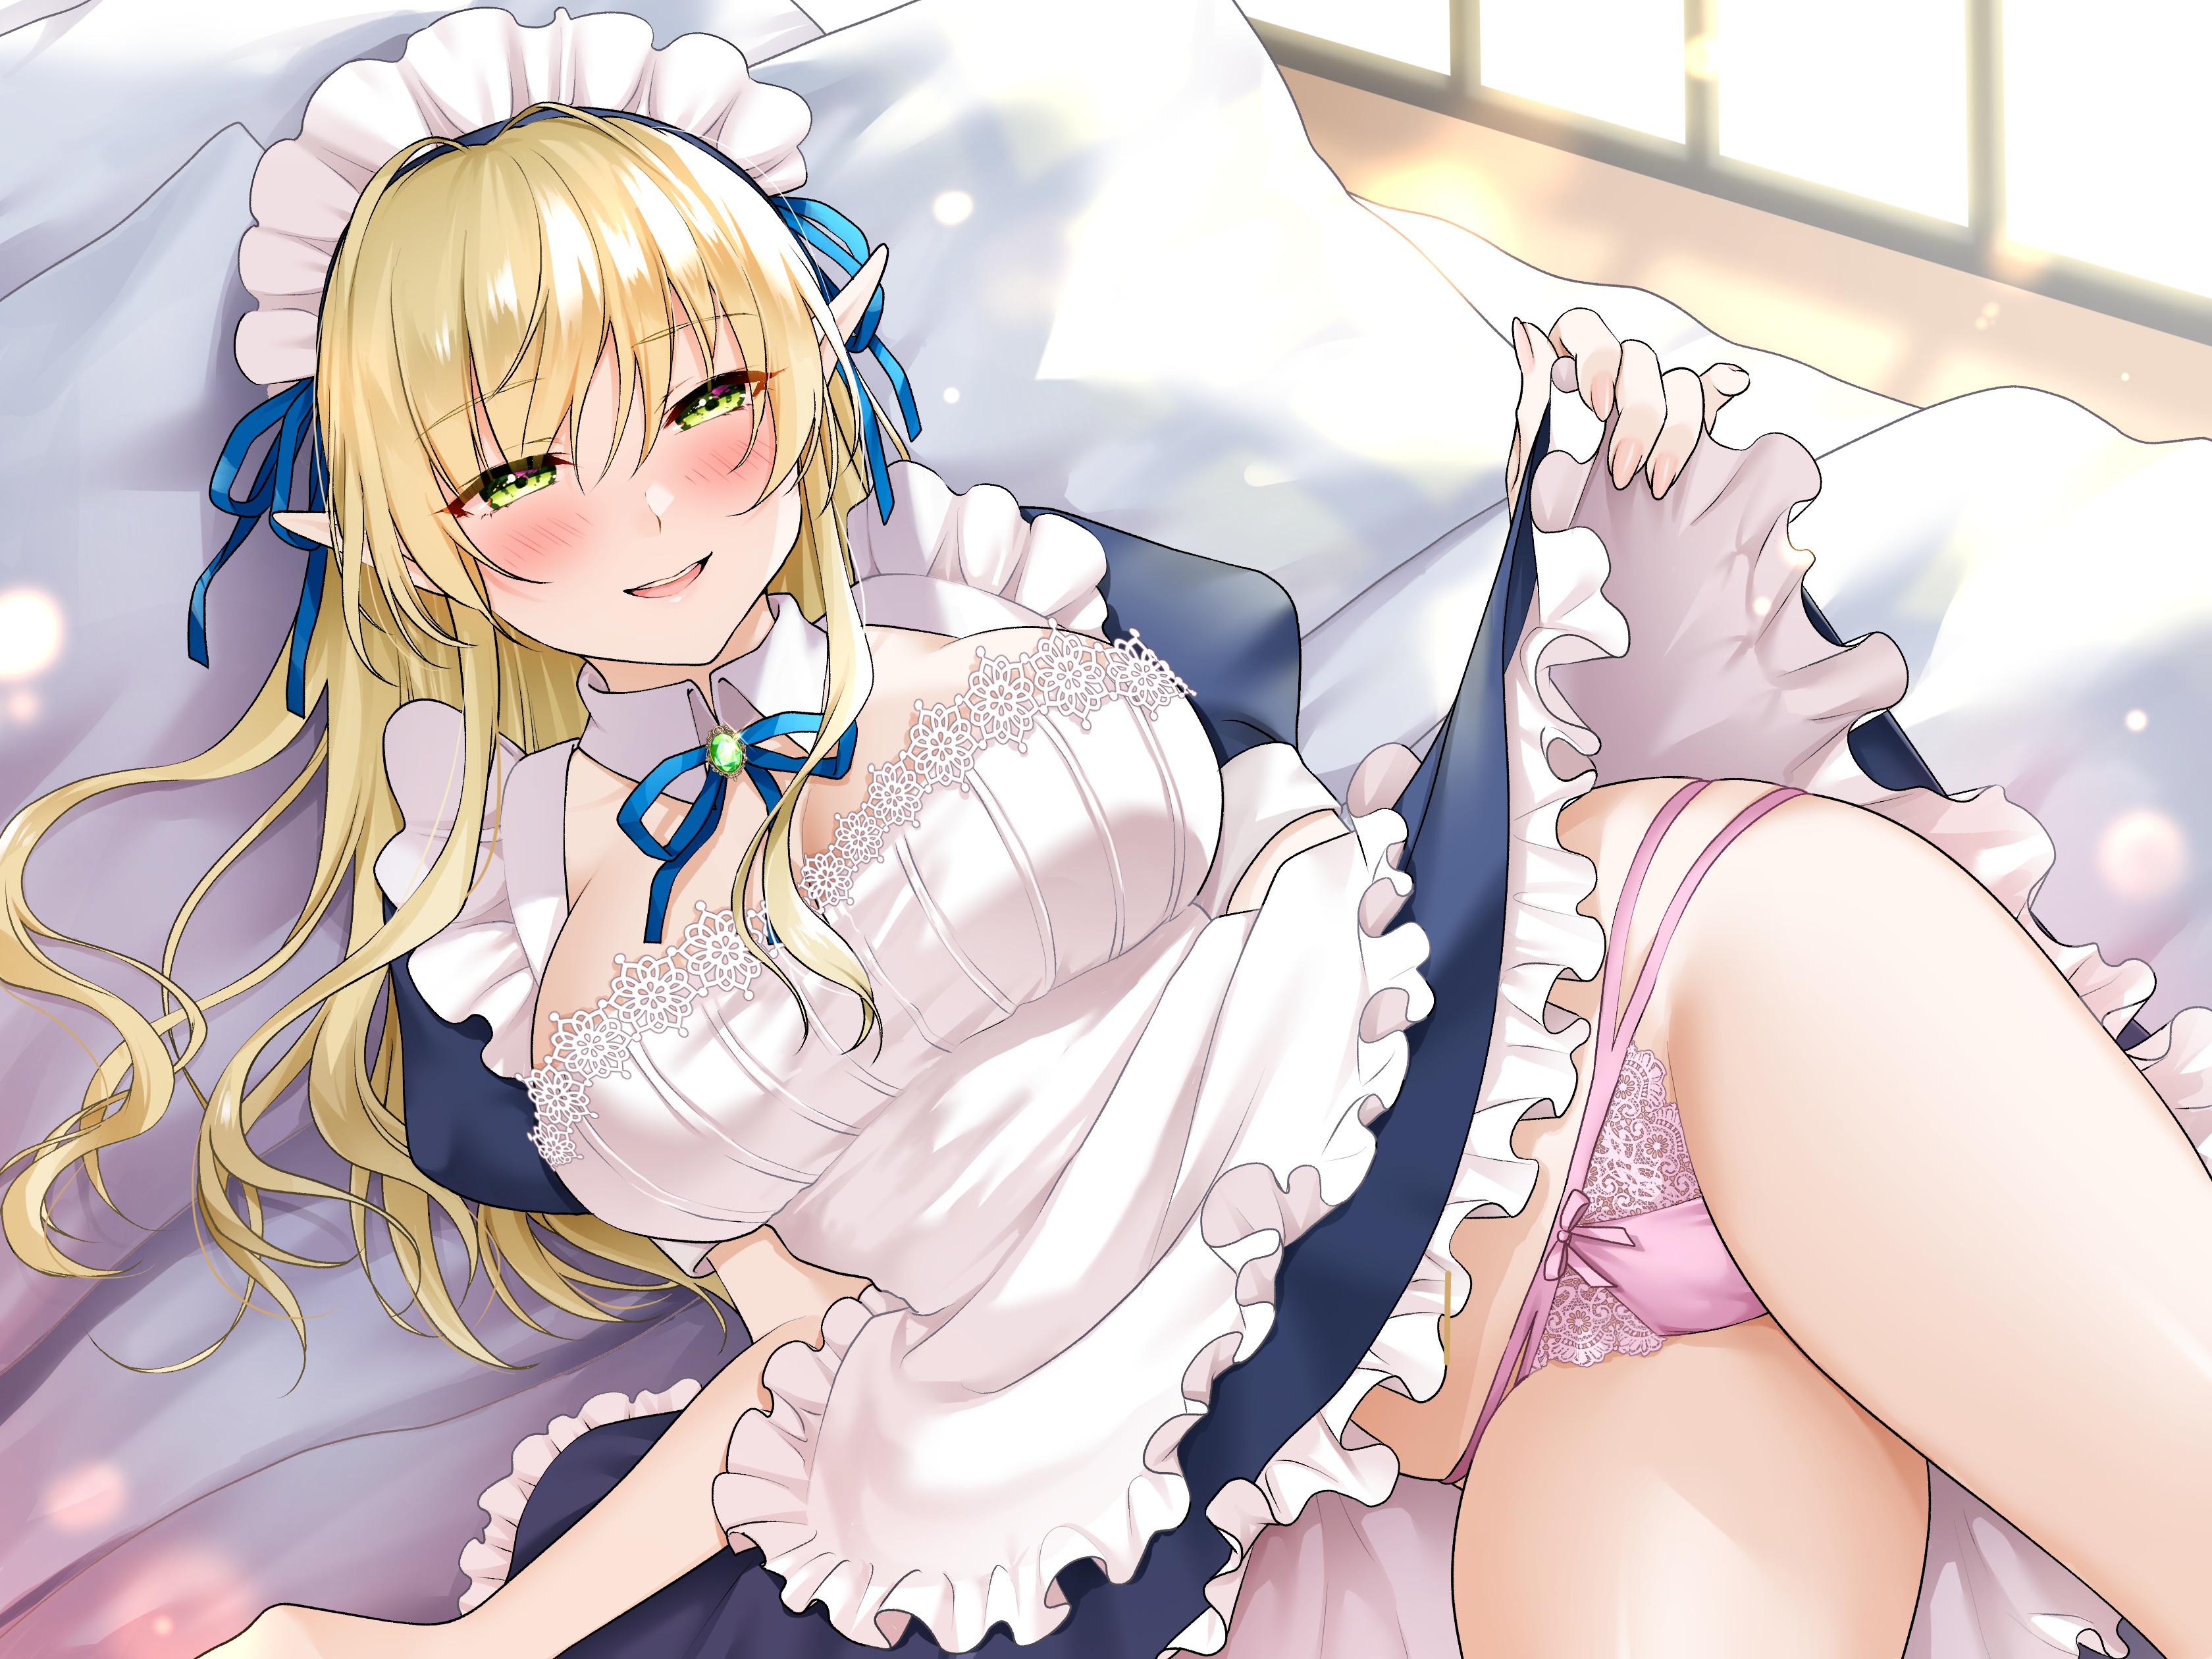 Anime 3360x2520 anime anime girls blonde pointy ears thighs pink panties green eyes maid maid outfit in bed bed lifting skirt blushing panties